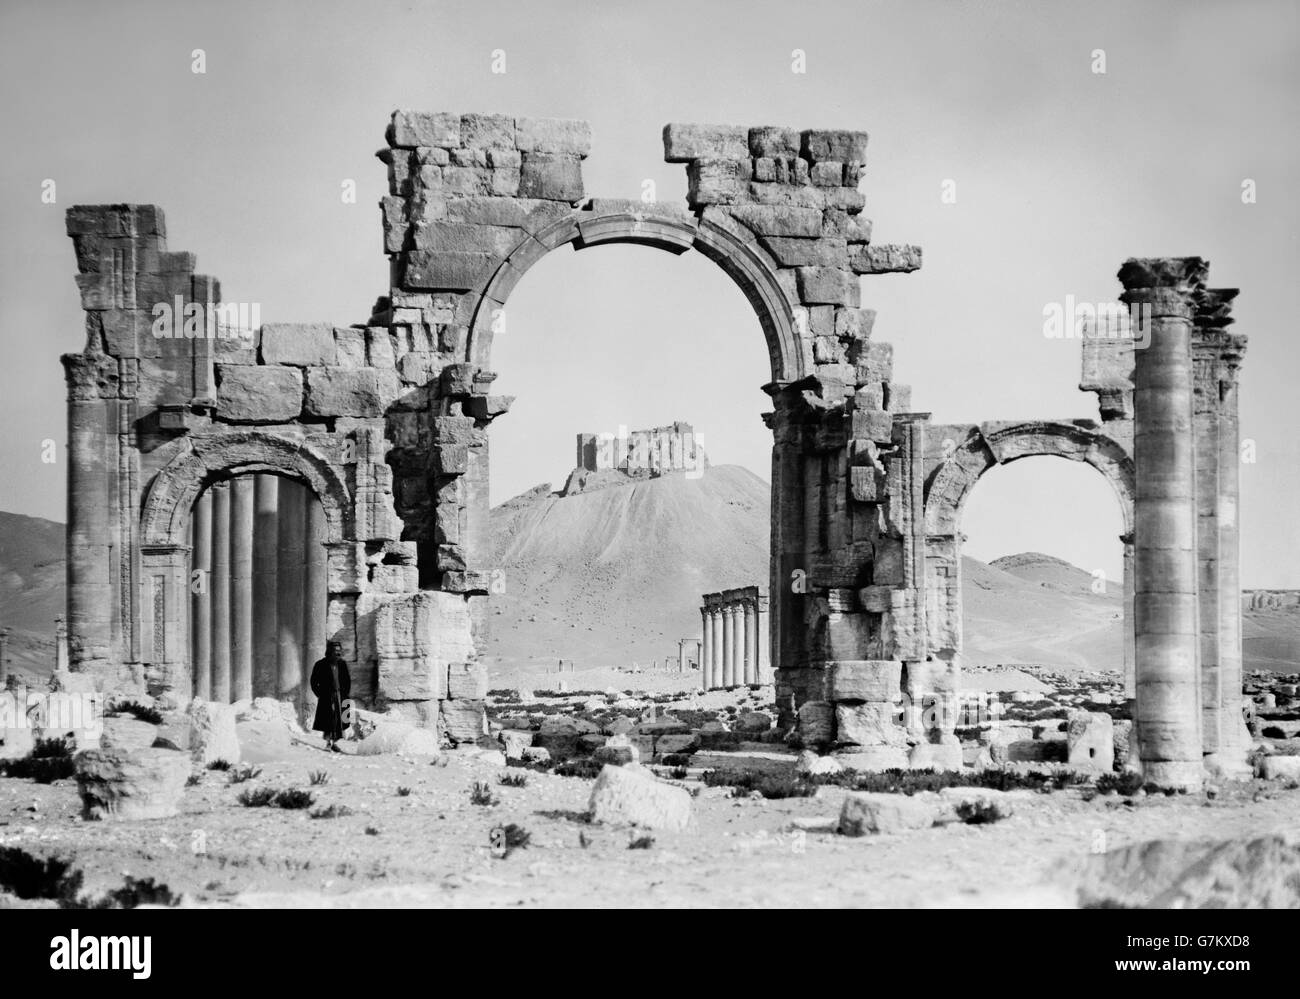 Palmyra, Syria. The Roman 'Arch of Triumph' (Monumental Arch) built by Emperor Septimius Severus at the beginning of the 3rdC AD.  Photo c.1900-1920. Stock Photo